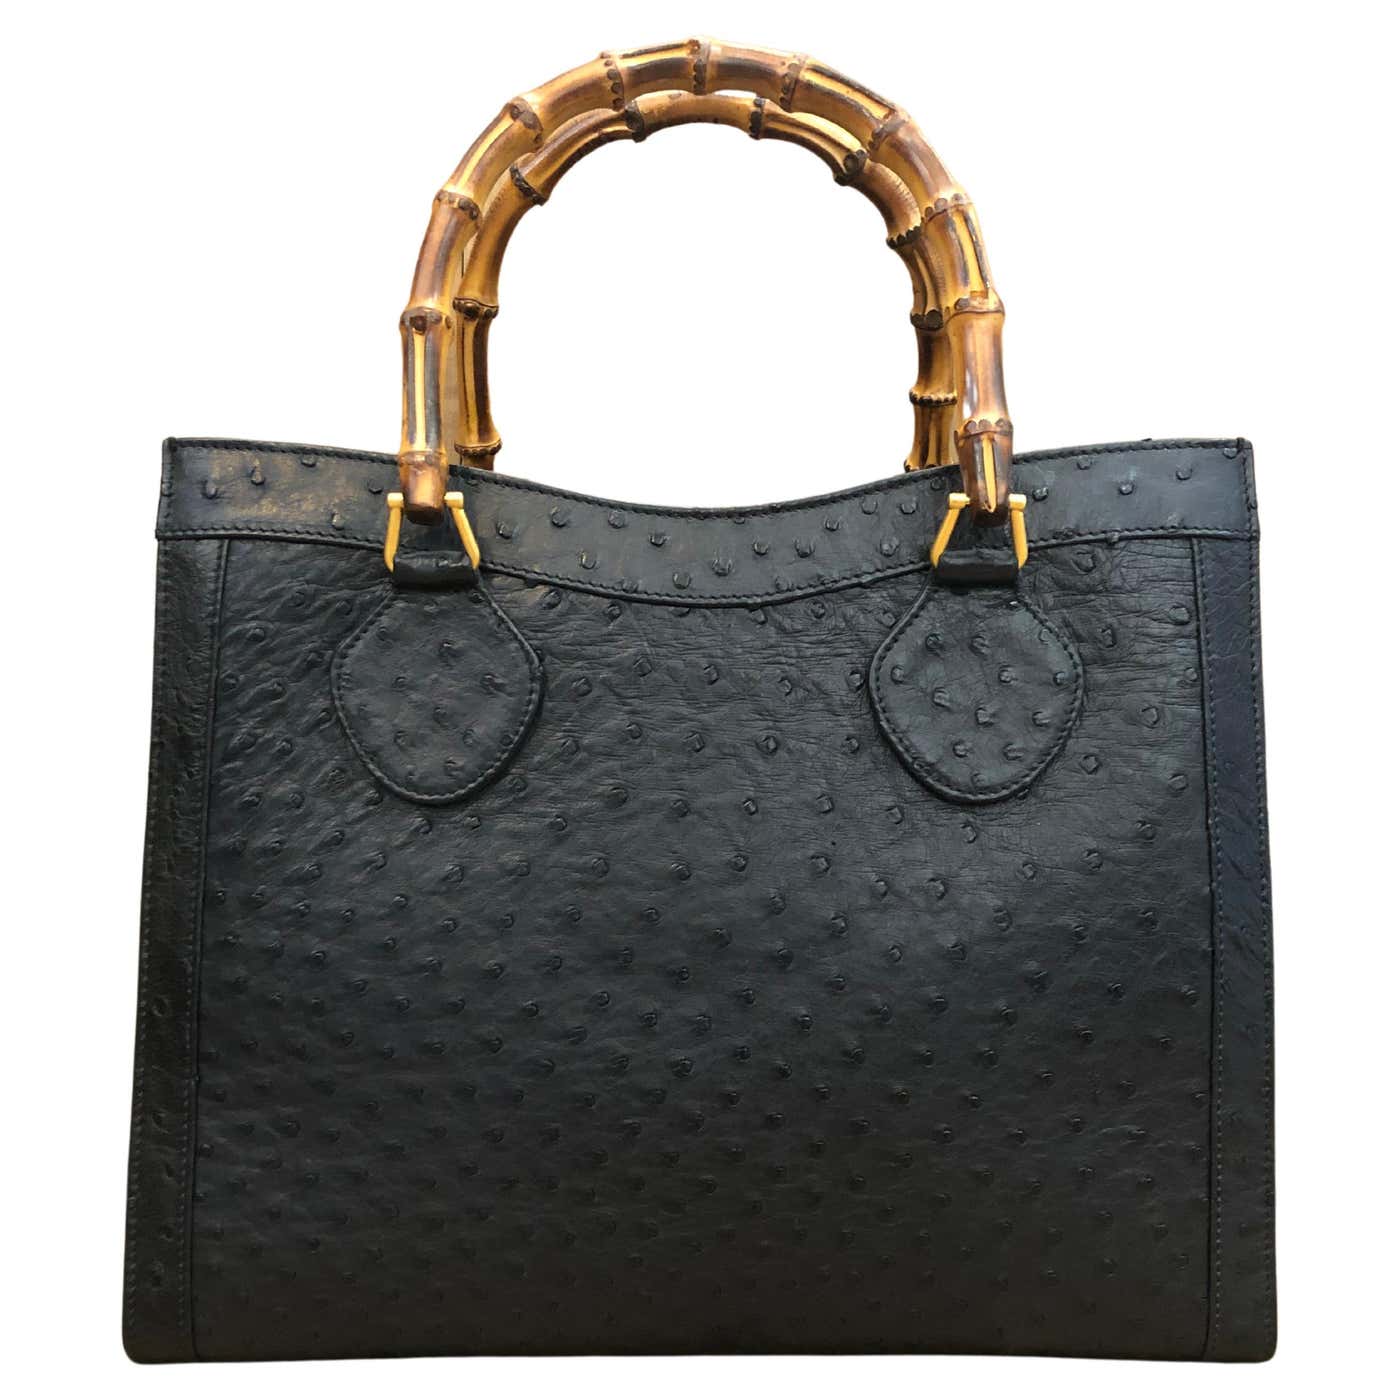 1990s Vintage GUCCI Black Ostrich Leather Bamboo Tote Diana Tote Bag ...